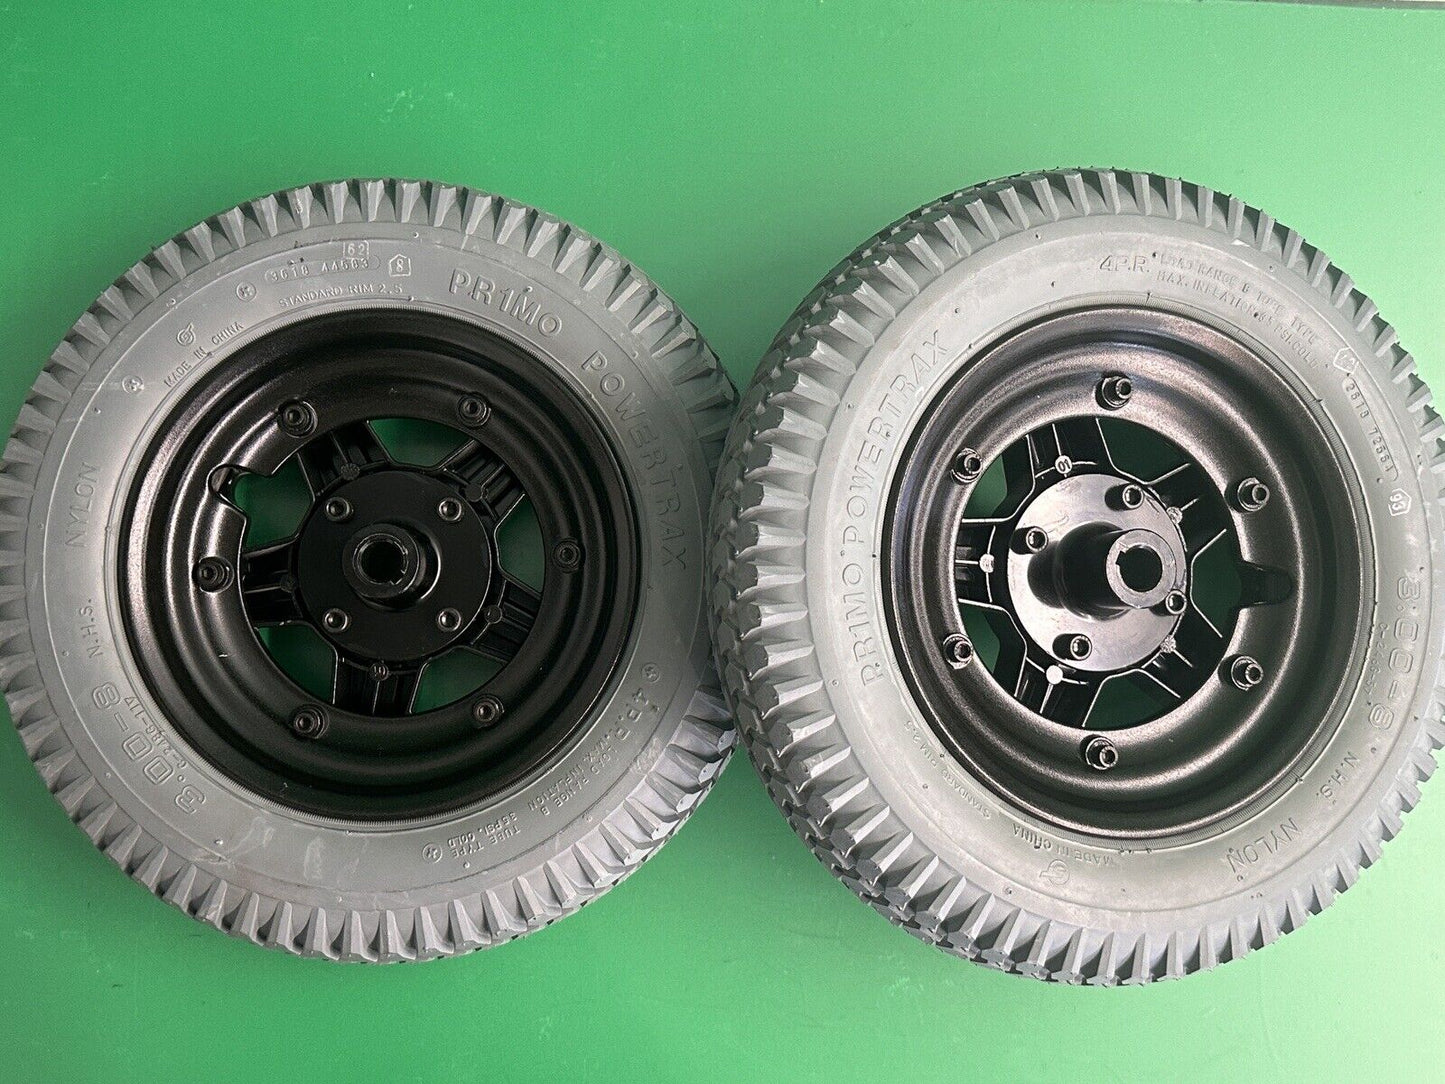 14"x3" MINT* Drive Wheels for the Quantum 600 & Jazzy 600 Power Wheelchair #J576